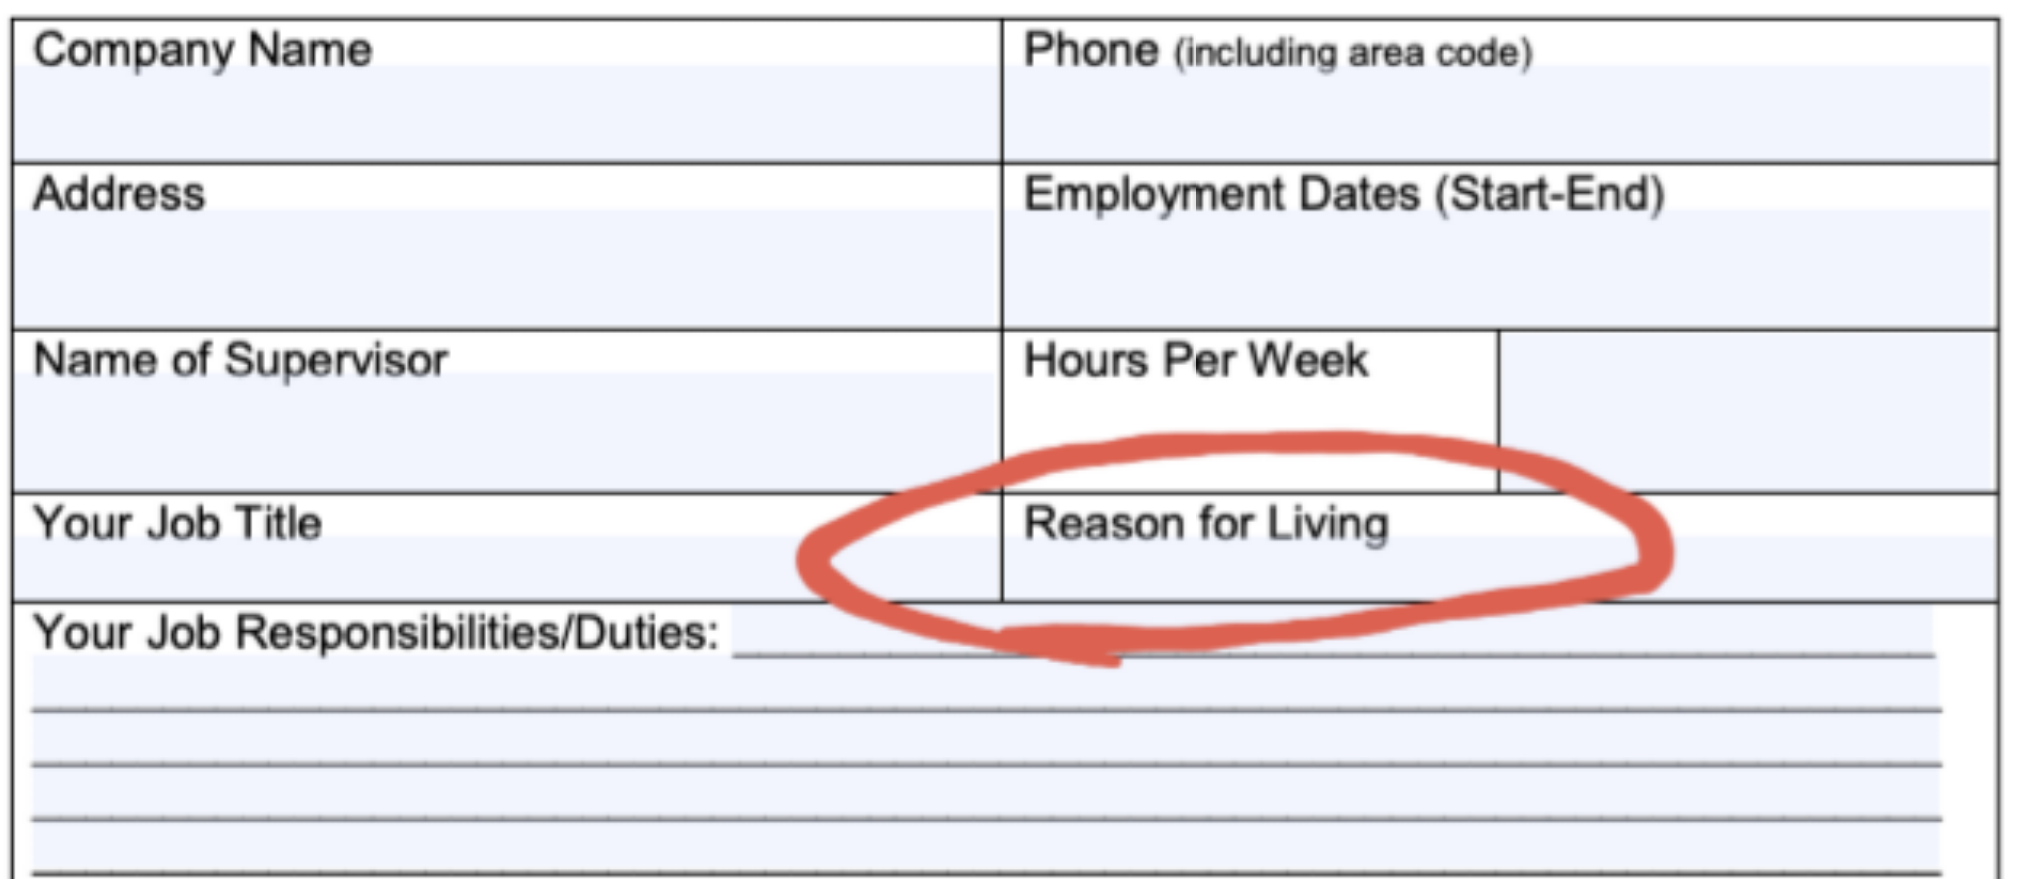 &quot;Reason for Living&quot;